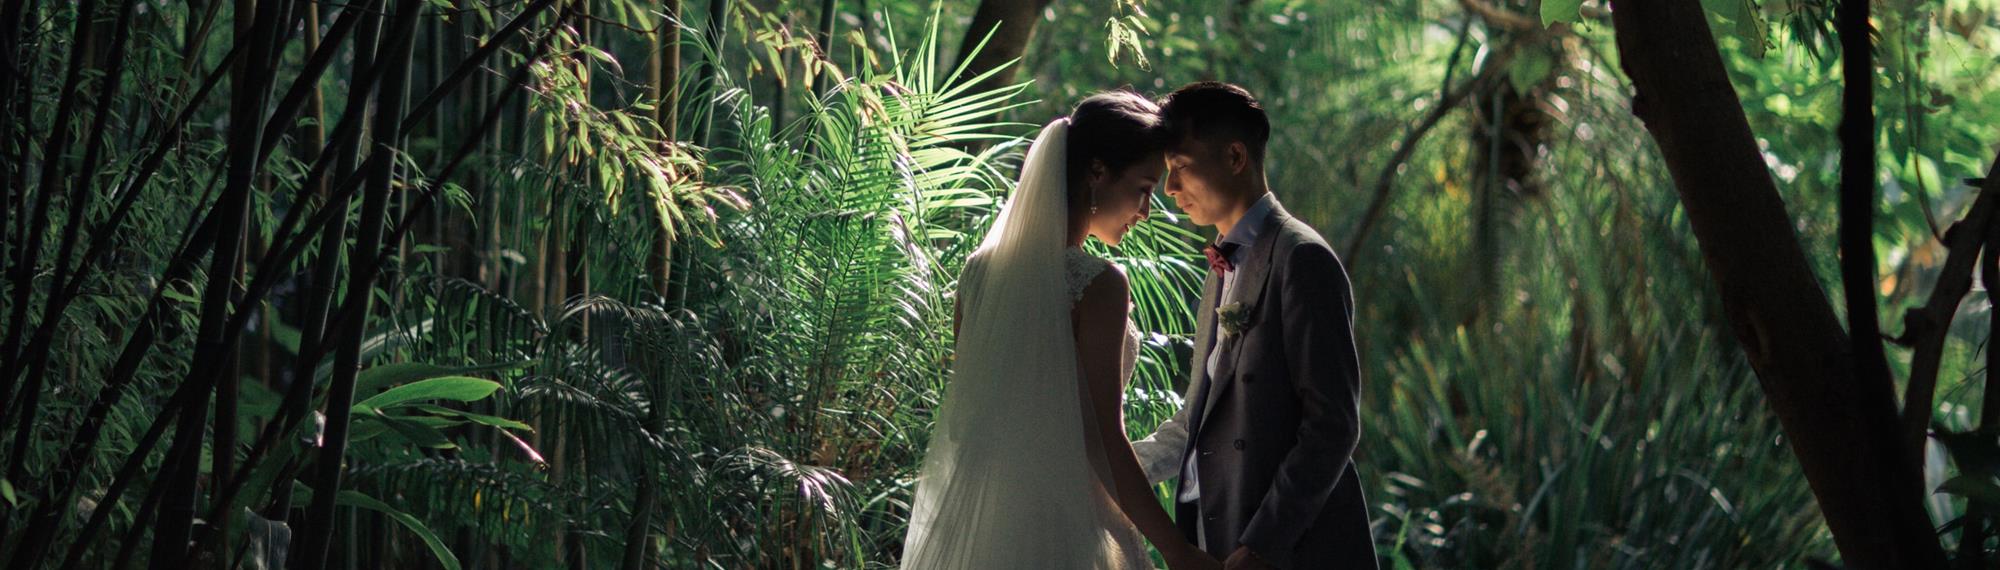 Bride and groom gazing into each others eyes while holding hands. Set in a lush rain forest setting. 